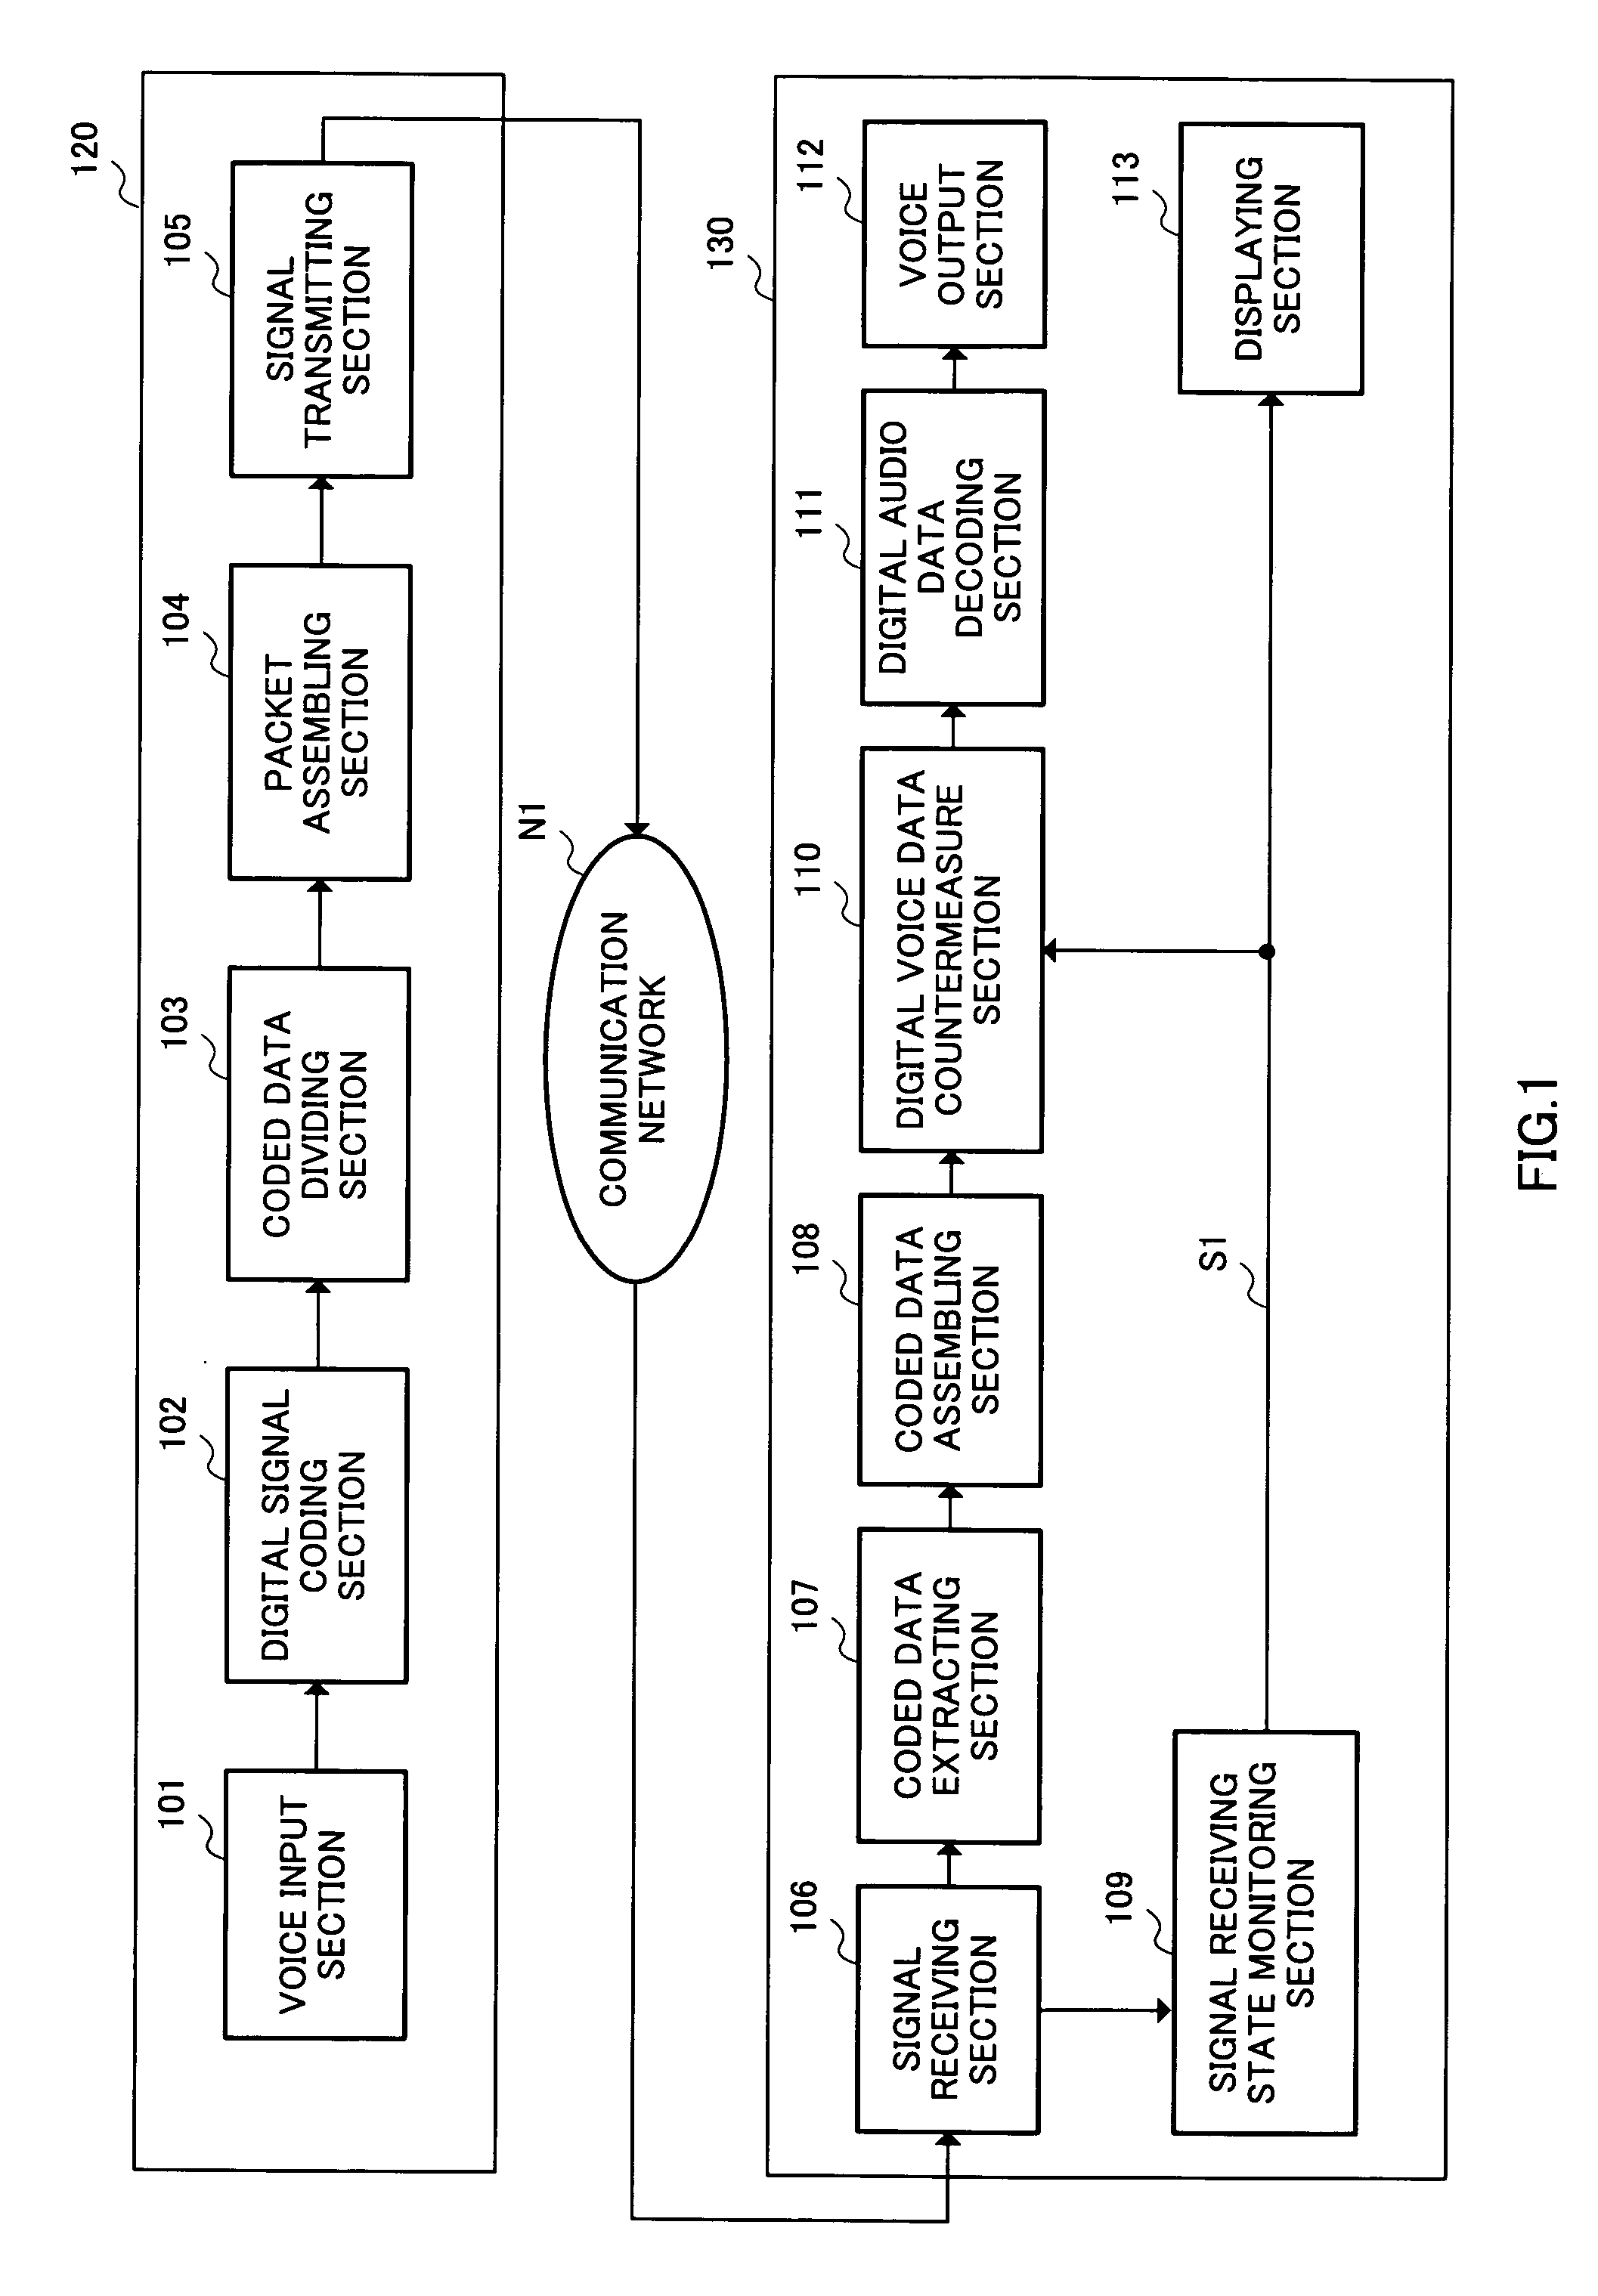 Packet communication terminal apparatus and communication system